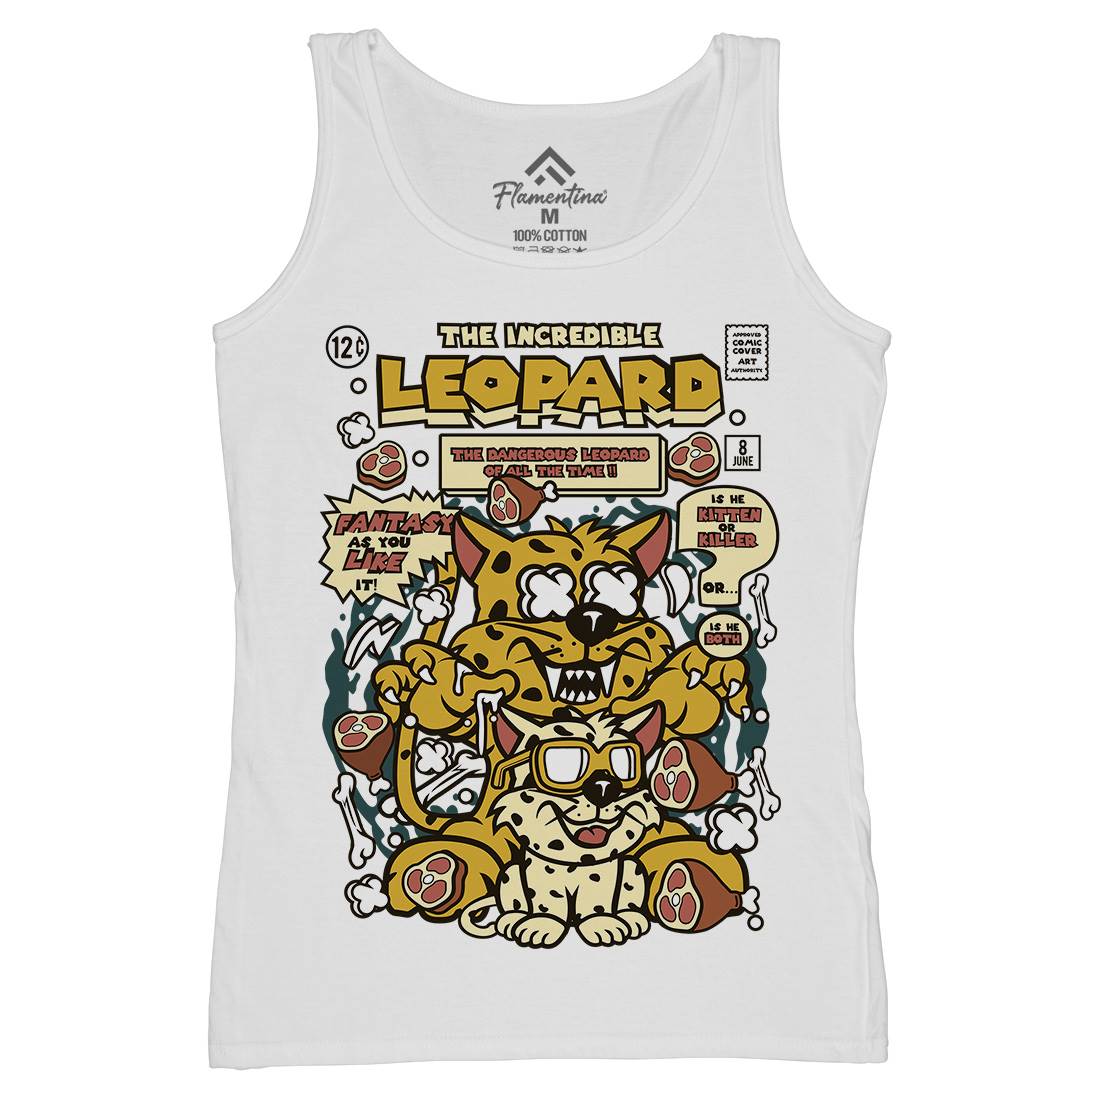 The Incredible Leopard Womens Organic Tank Top Vest Animals C677